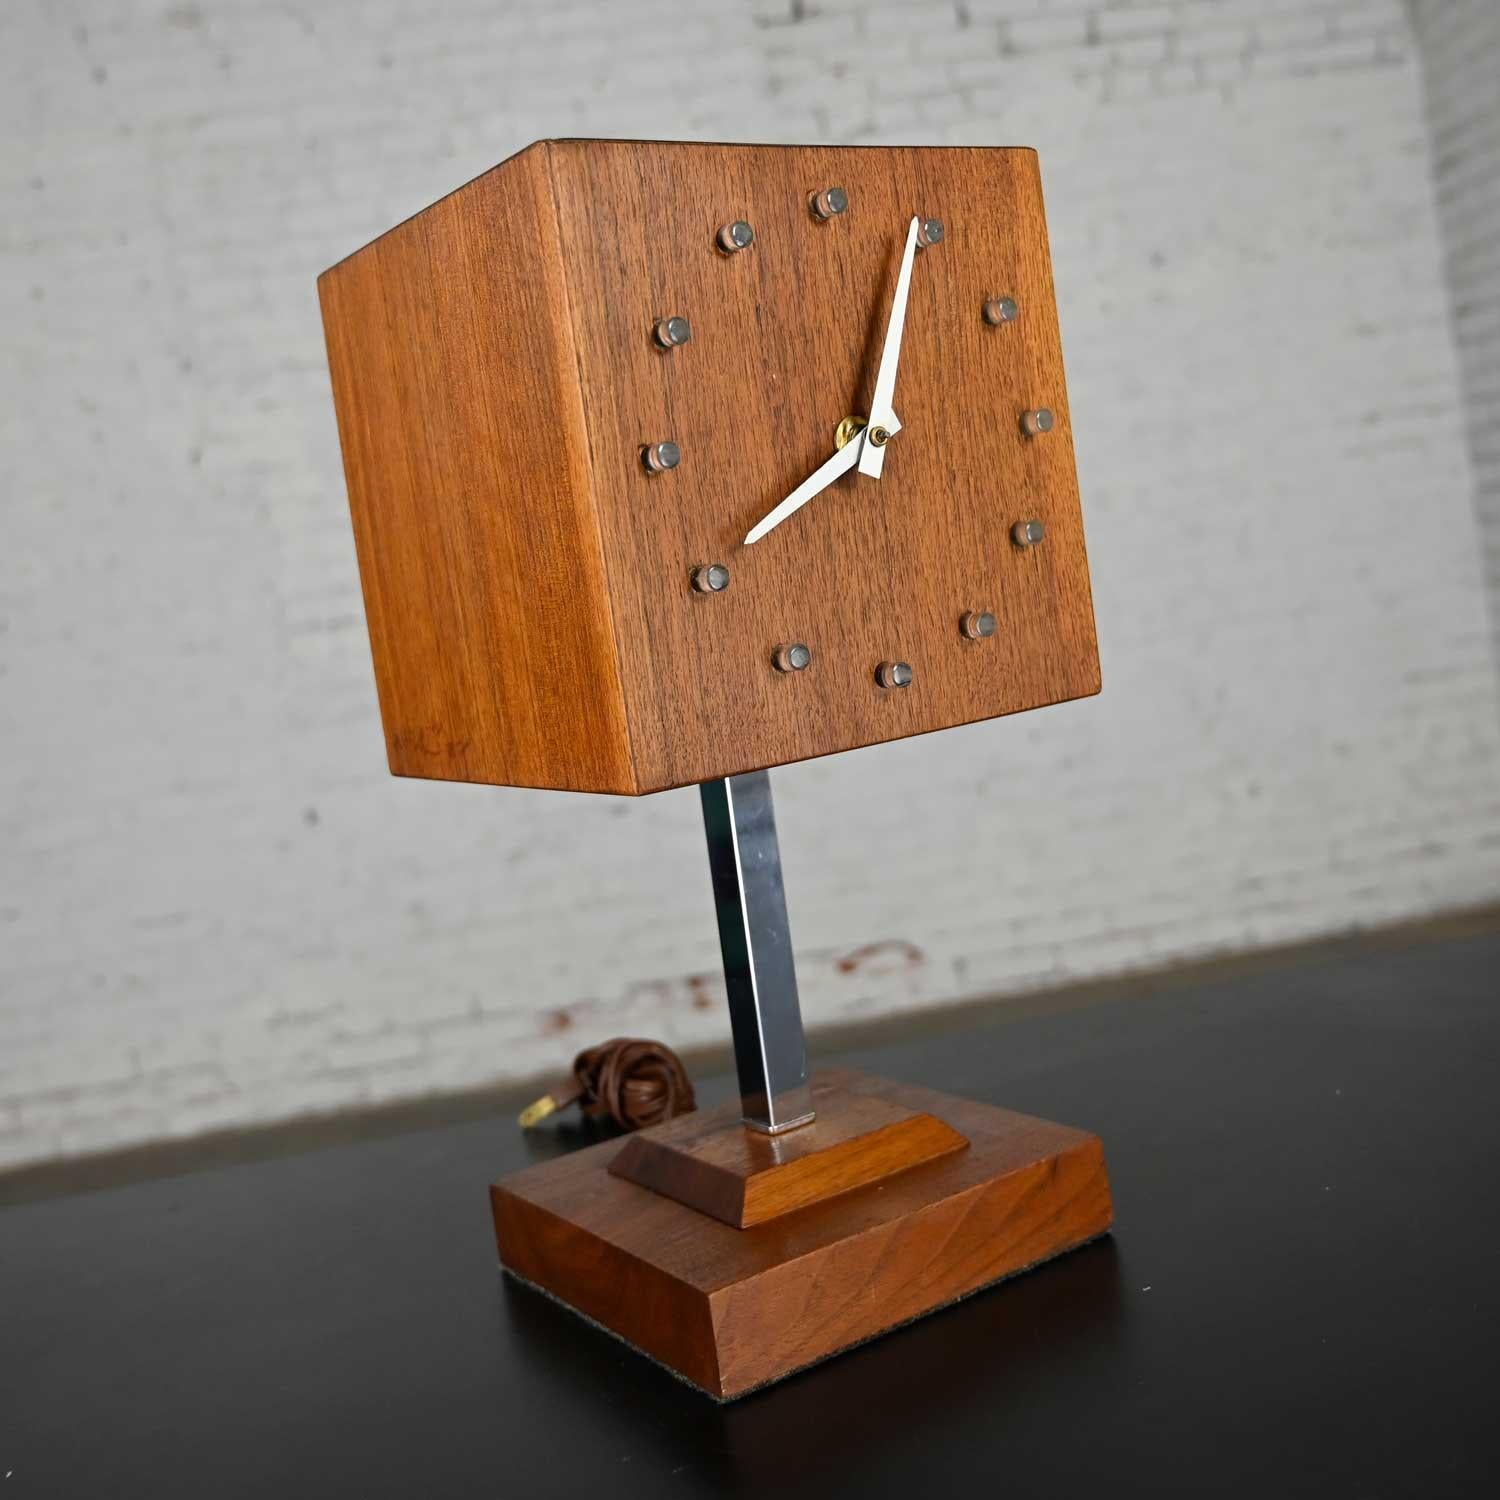 Awesome Mid-Century Modern walnut cube clock/lamp on a Stand comprised of a chrome shaft and square tiered walnut base by V. H. Woolums in the style of Howard Miller Clocks. Beautiful condition keeping in mind that this is vintage so will show signs